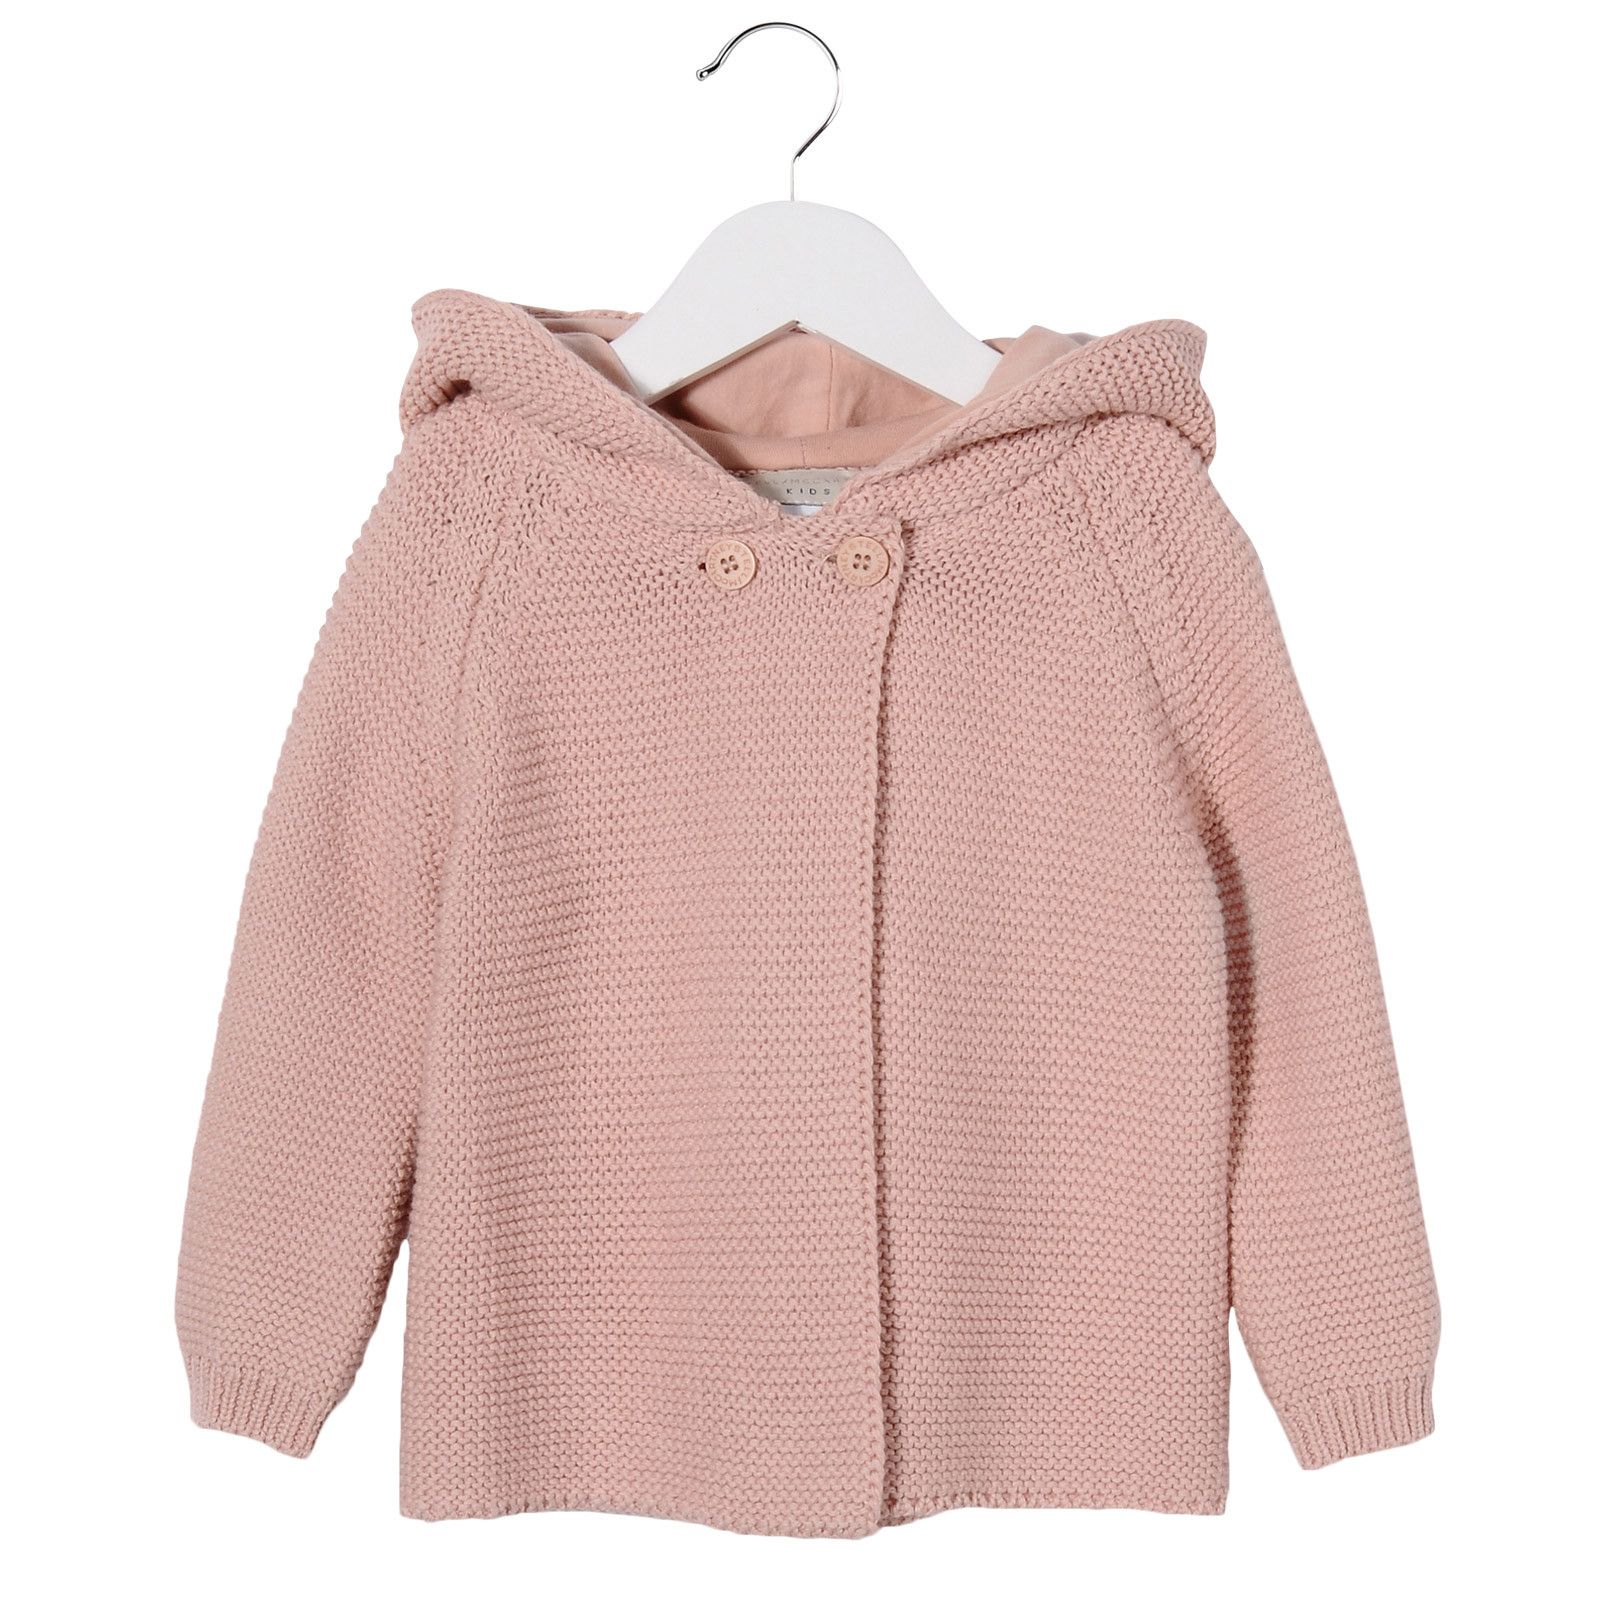 Baby Dark Pink Cotton Knitted Cardigan With Hood Bunny Ears Trims - CÉMAROSE | Children's Fashion Store